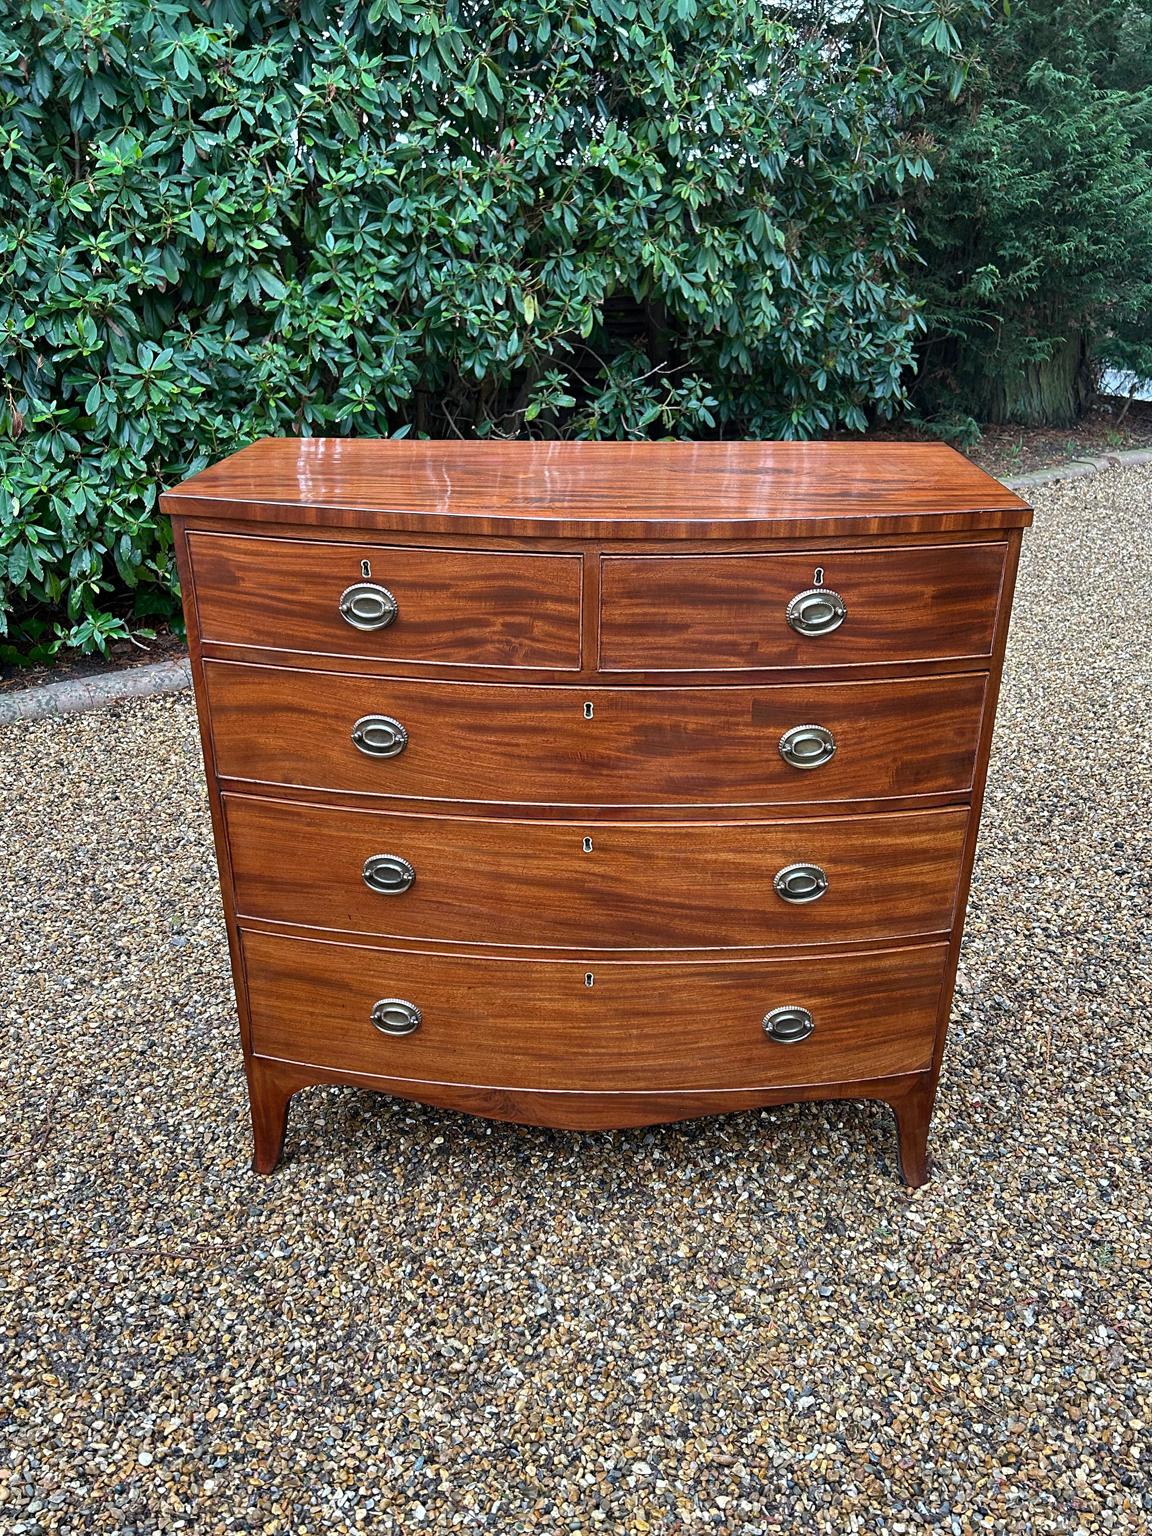 A good quality Georgian mahogany bow front chest of drawers – two short and three long mahogany lined drawers, oval brass handles and splayed feet.

circa: 1820

Dimensions:
Height: 41.5 inches – 105 cms
Width: 42 inches – 107 cms
Depth: 18.5